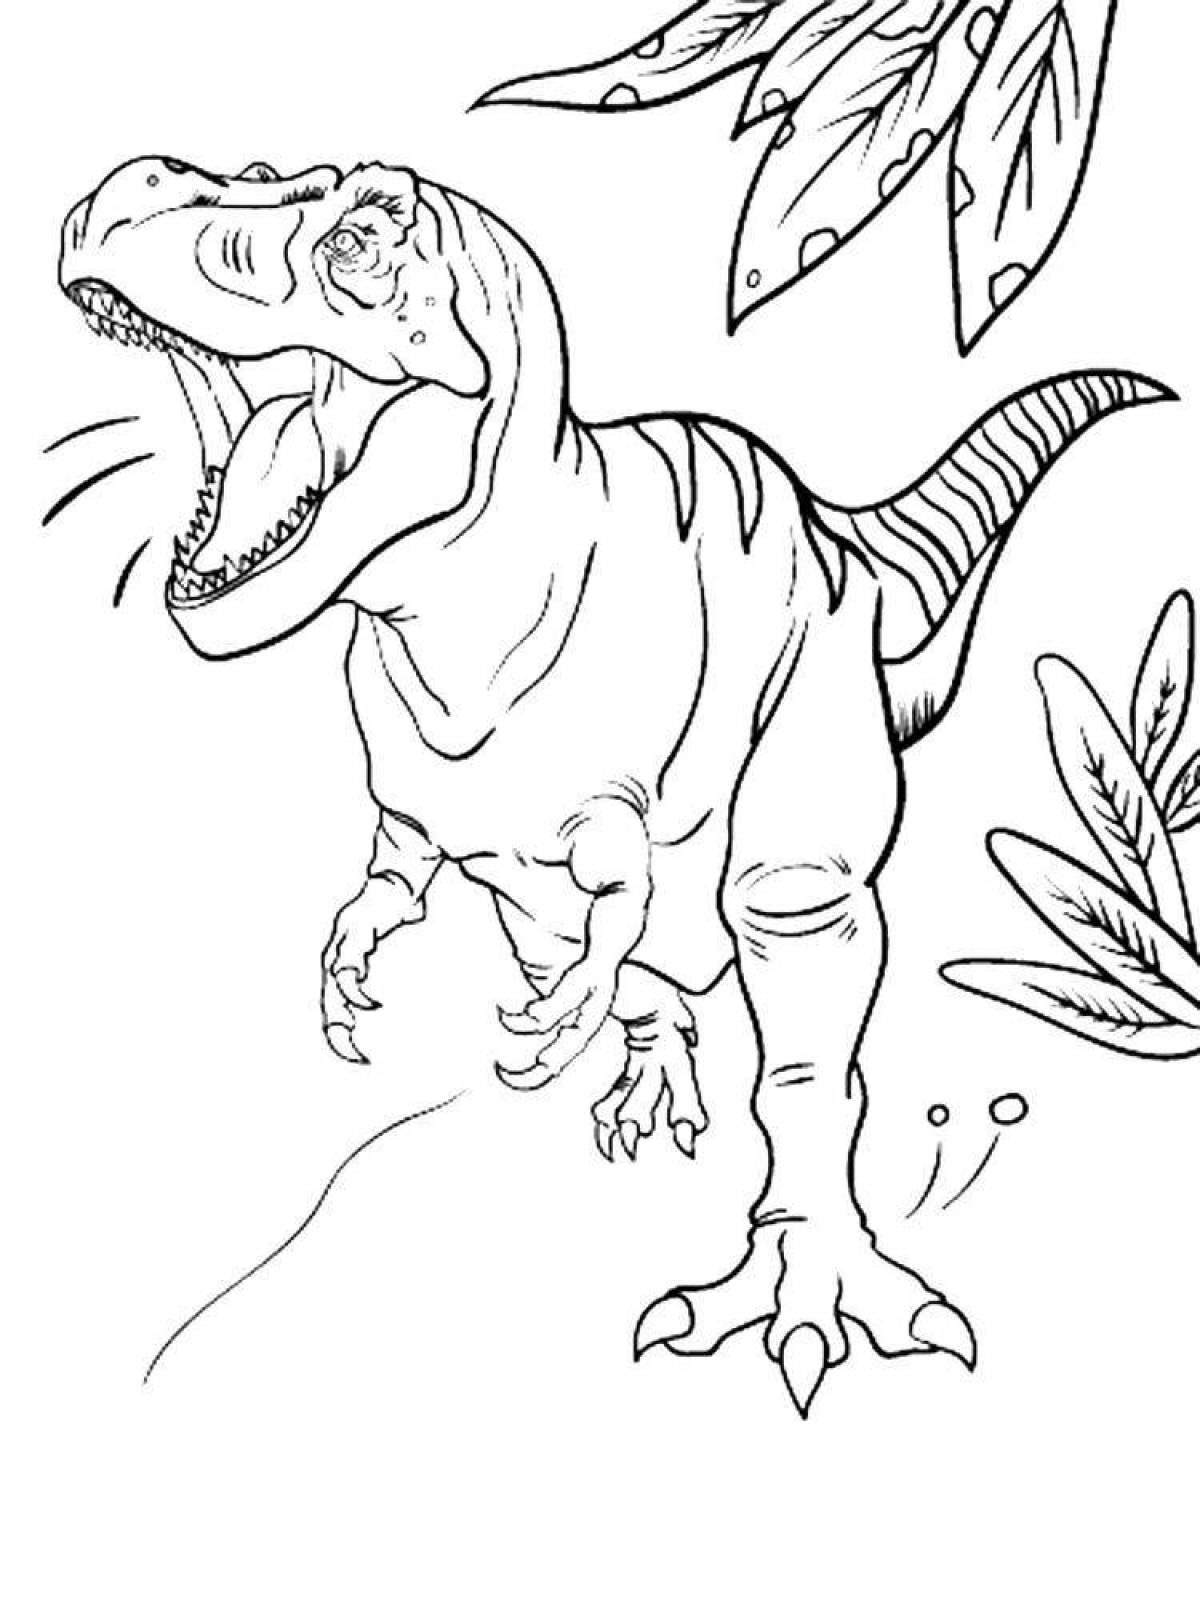 Tyrex exotic dinosaur coloring page